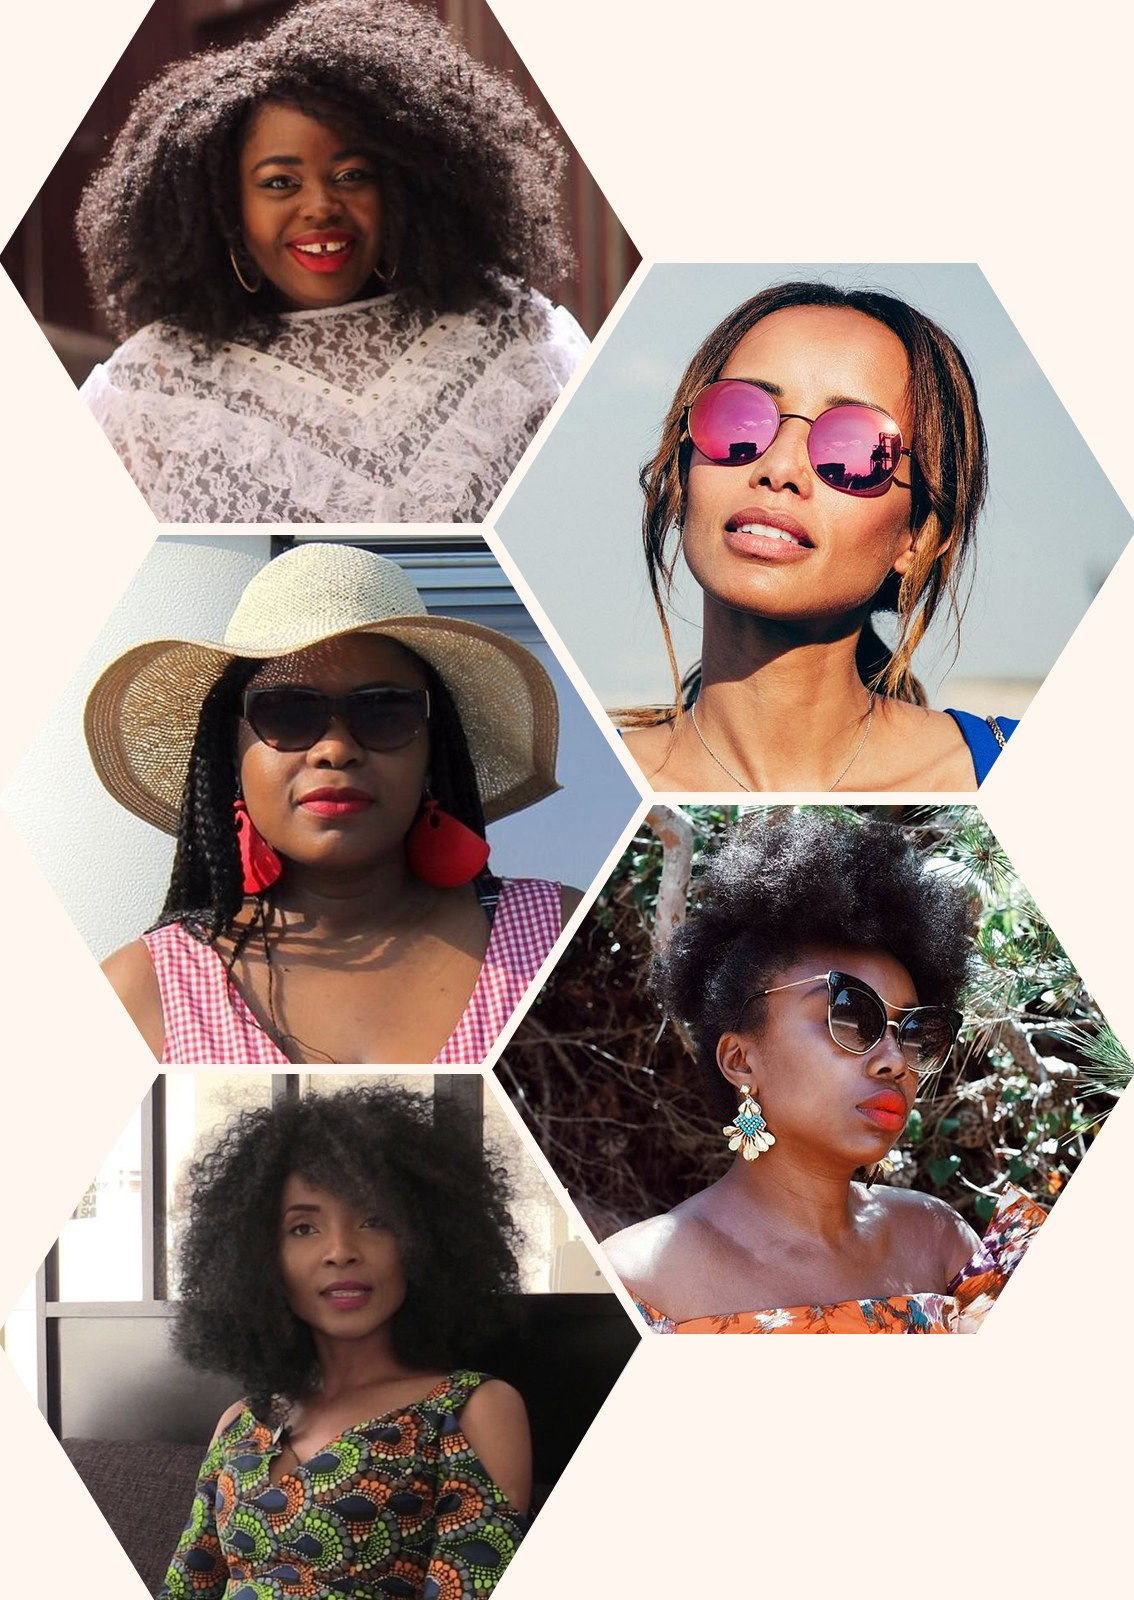 ESTA IS FRENCH-GIRL BEAUTY. FROM TOP LEFT TO RIGHT: BLOGGER [GAËLLE PRUDENCIO](https://www.instagram.com/gaelleprudencio/){: rel=nofollow}, ACTRESS [SONIA ROLLAND](https://www.instagram.com/soniarolland/){: rel=nofollow}, BLOGGER [DANIELLE AHANDA](https://www.instagram.com/bestofd/){: rel=nofollow}, BLOGGER AND AUTHOR [FATOU D'NIADYE](https://www.instagram.com/blackbeautybag/){: rel=nofollow}, AND STYLIST [NATACHA BACO](https://www.instagram.com/by_natachabaco/){: rel=nofollow}. PHOTO: ART BY EMILY KEMP. PHOTOS COURTESY OF INSTAGRAM.